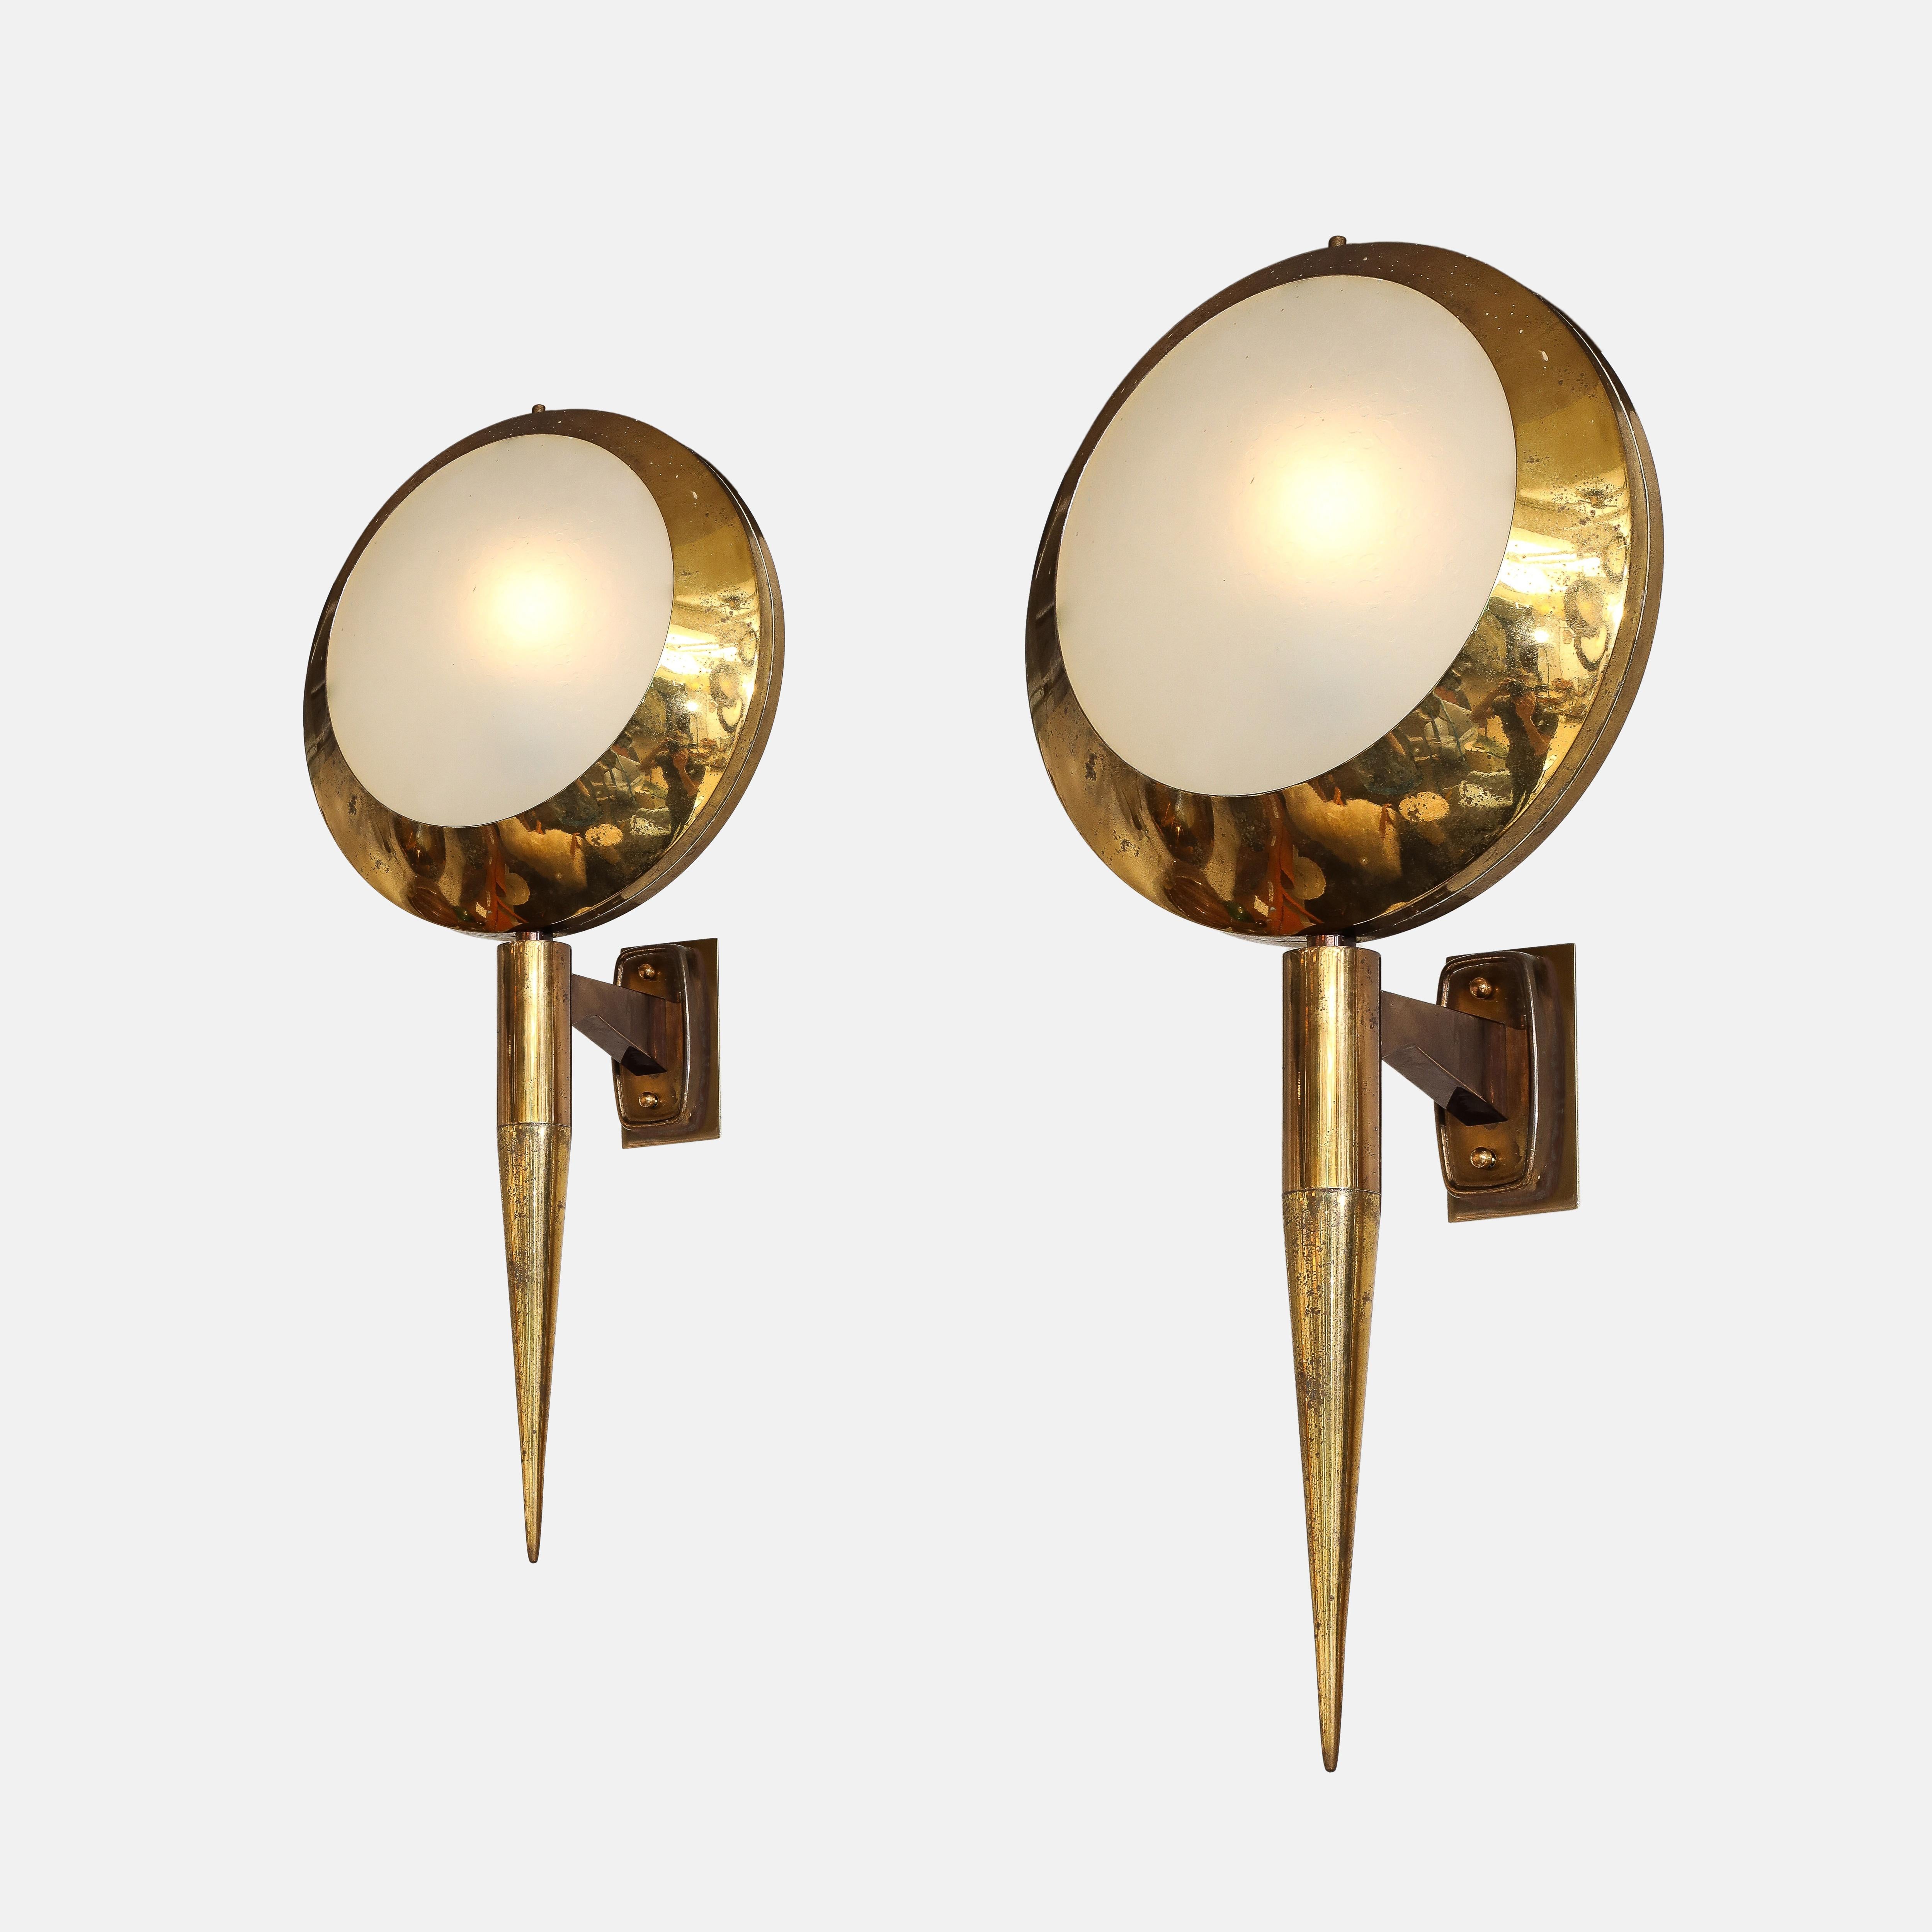 Stilnovo rare pair of large sconces or wall lights model 2128 each consisting of a polished and burnished brass structure which holds a textured glass diffuser, Italy, circa 1959.  These modernist chic sconces are large in scale and make a bold